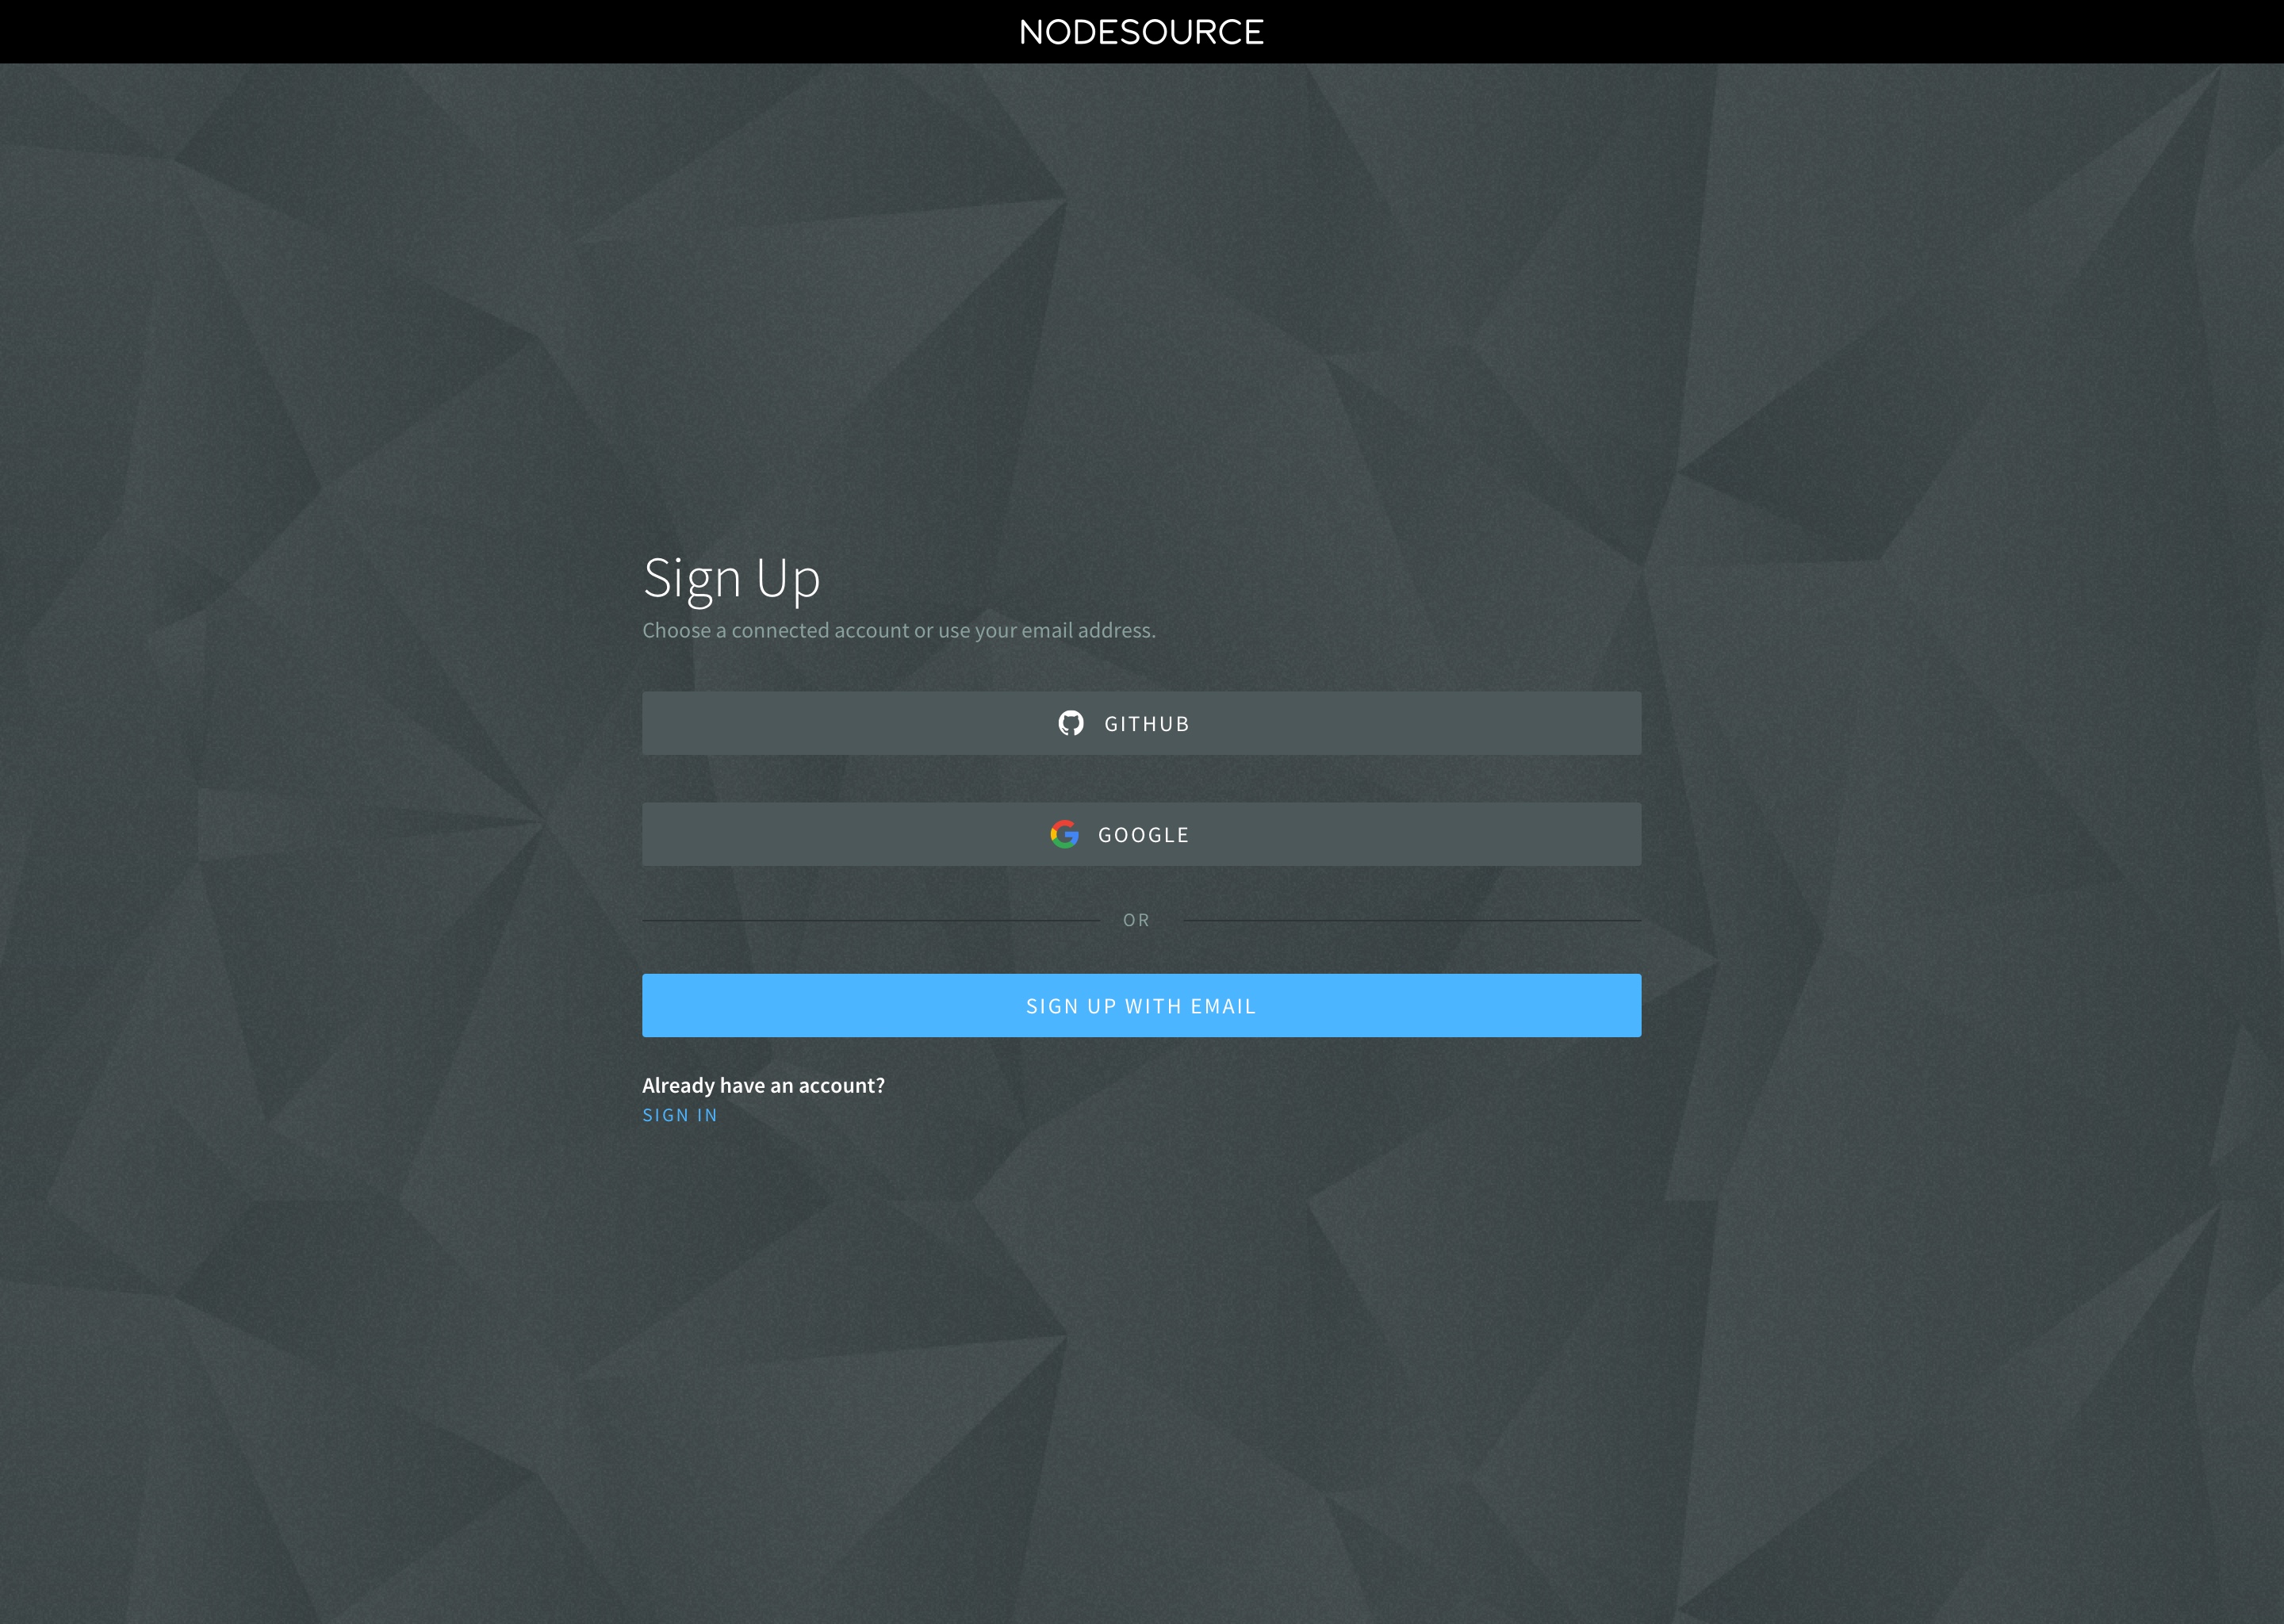 Sign up screen